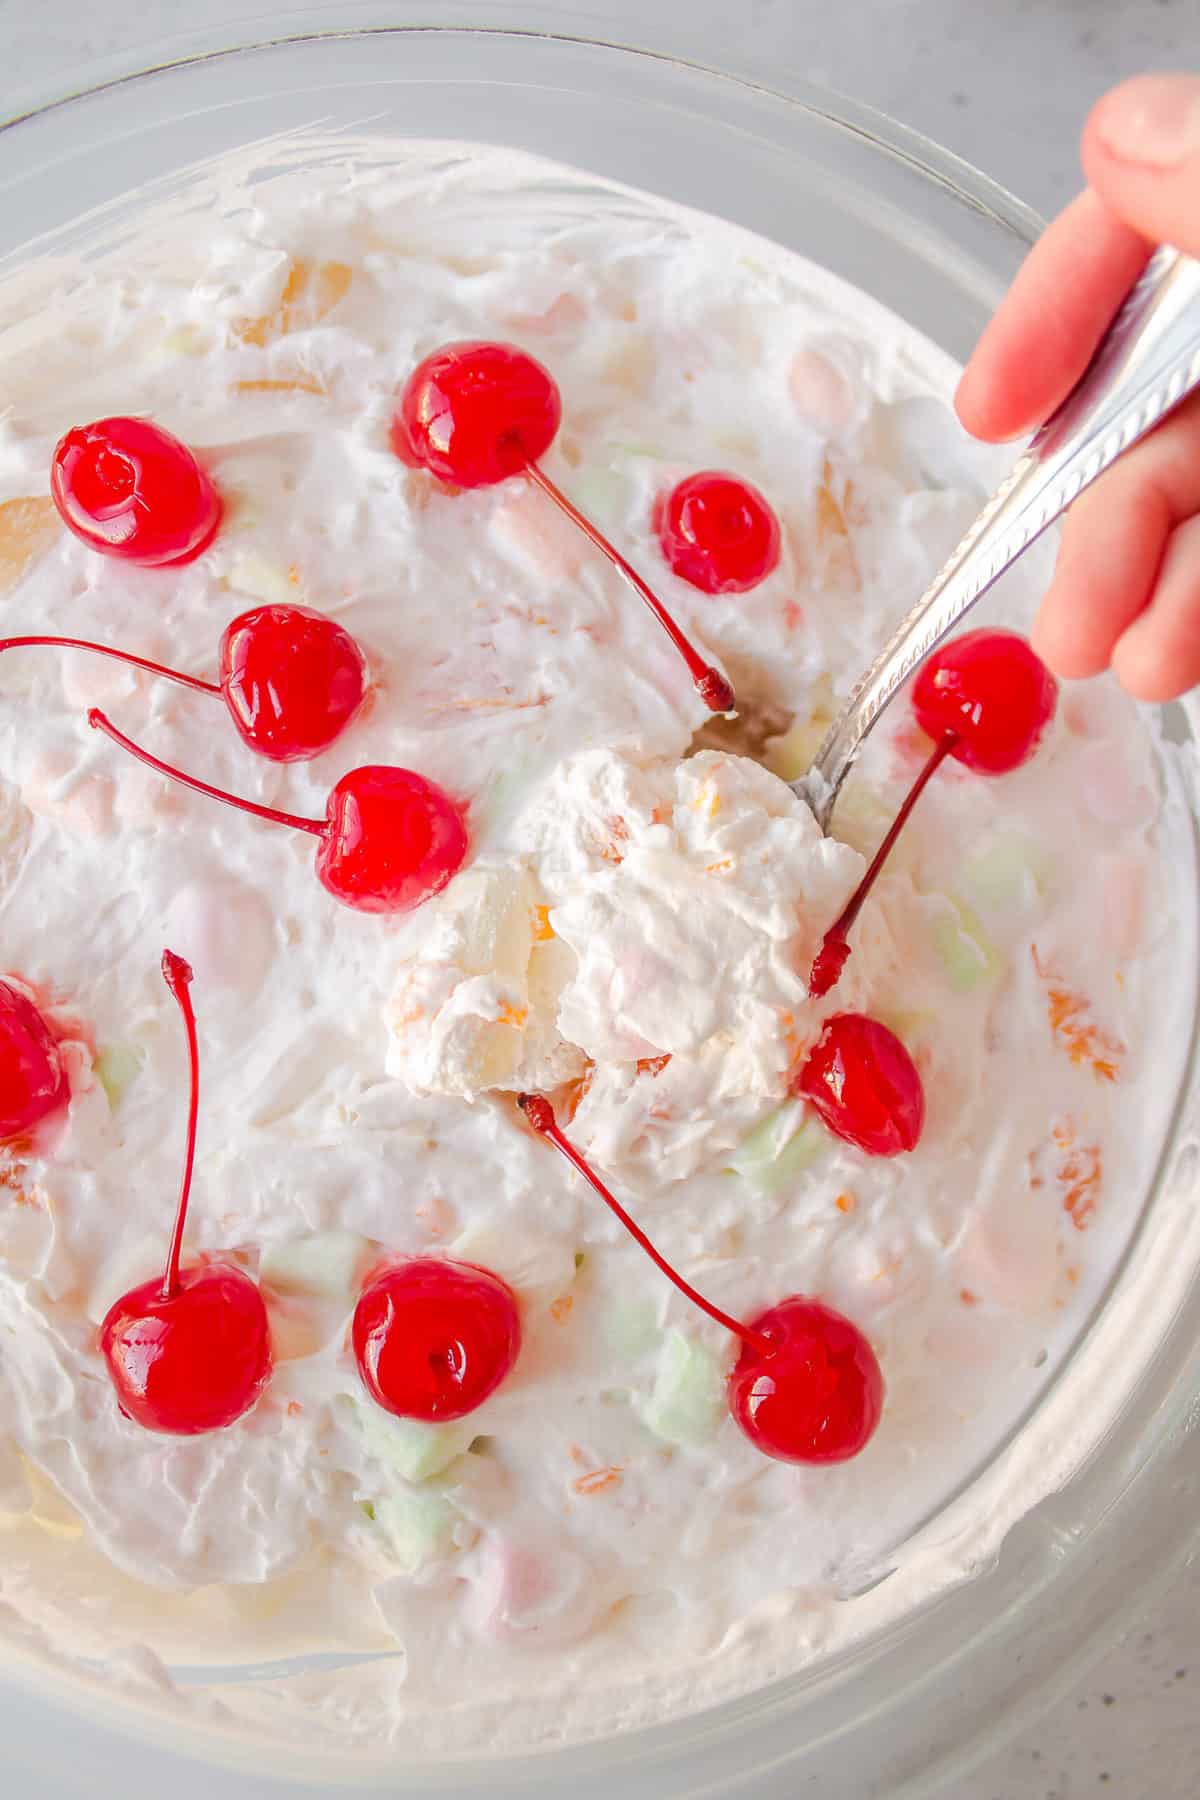 ambrosia salad with cherries on top served in a white glass bowl